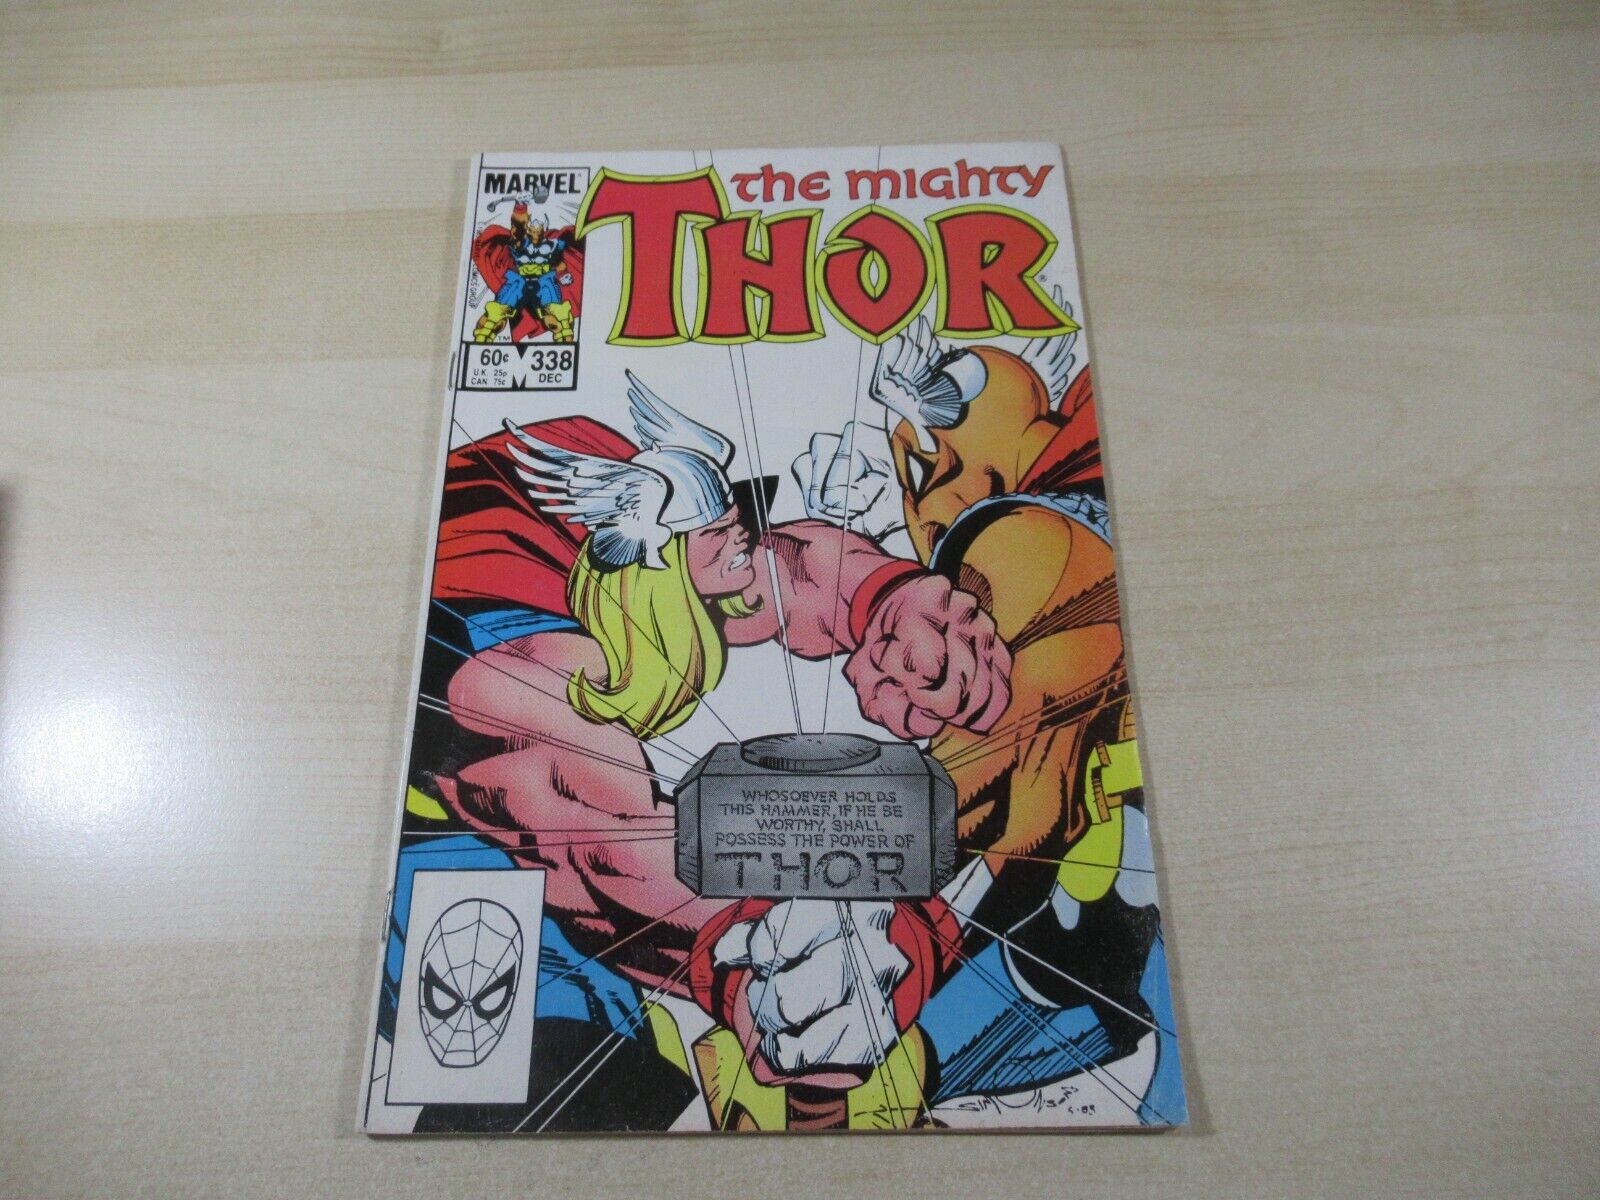 THOR #338 KEY ISSUE 2ND APPEARANCE OF BETA RAY BILL SWEET BATTLE COVER 